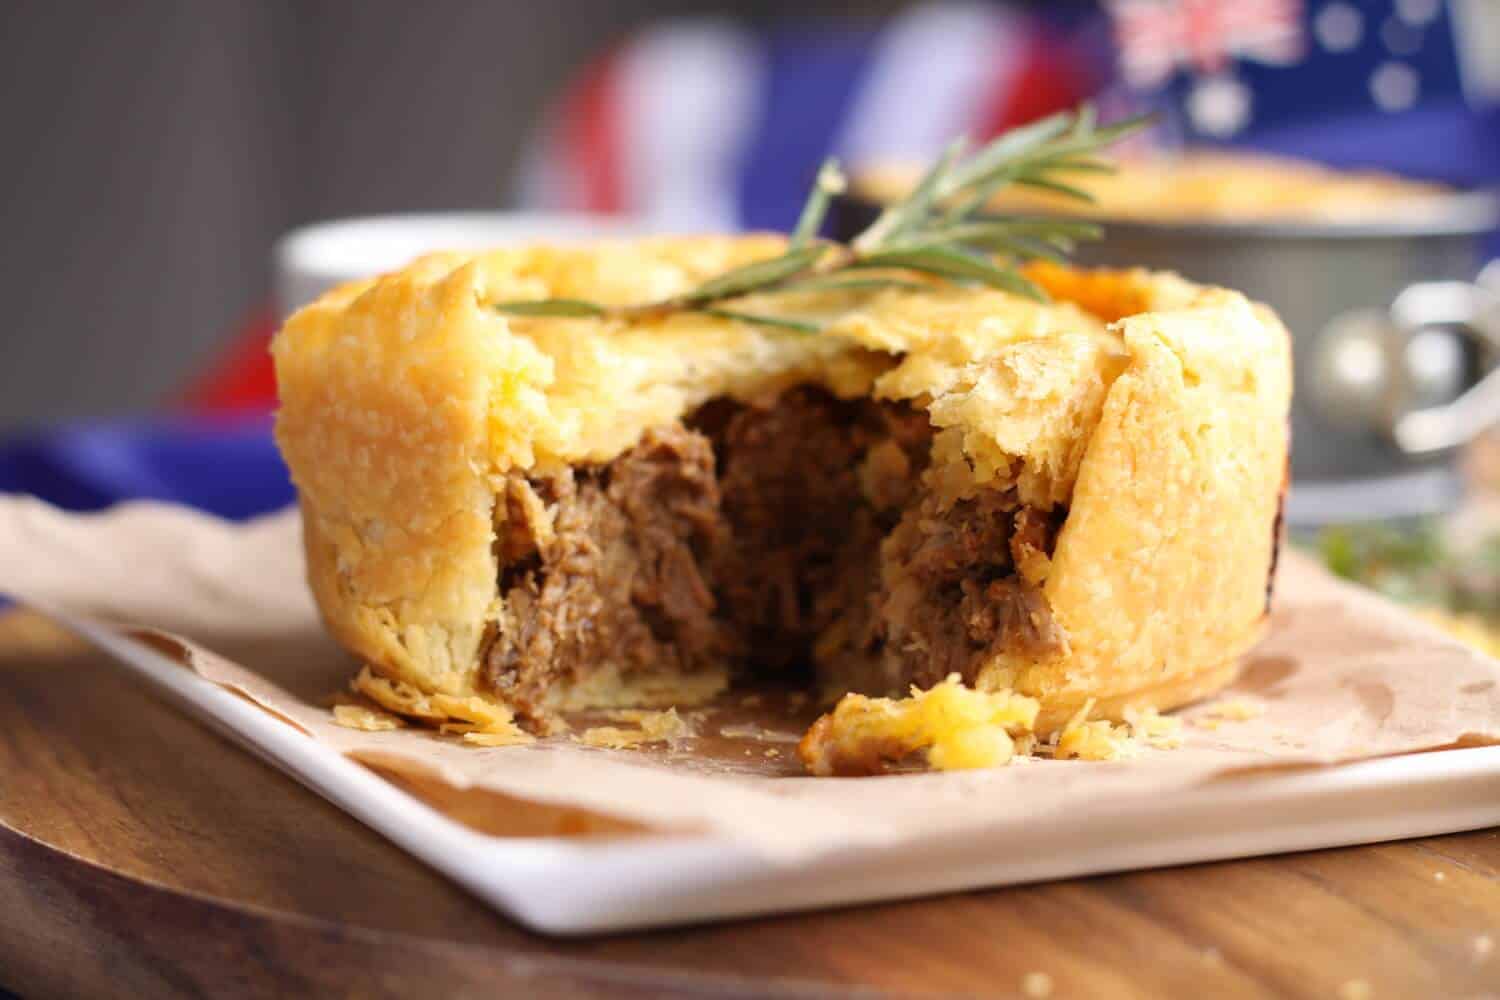 A lamb pie cut open to show the inside.